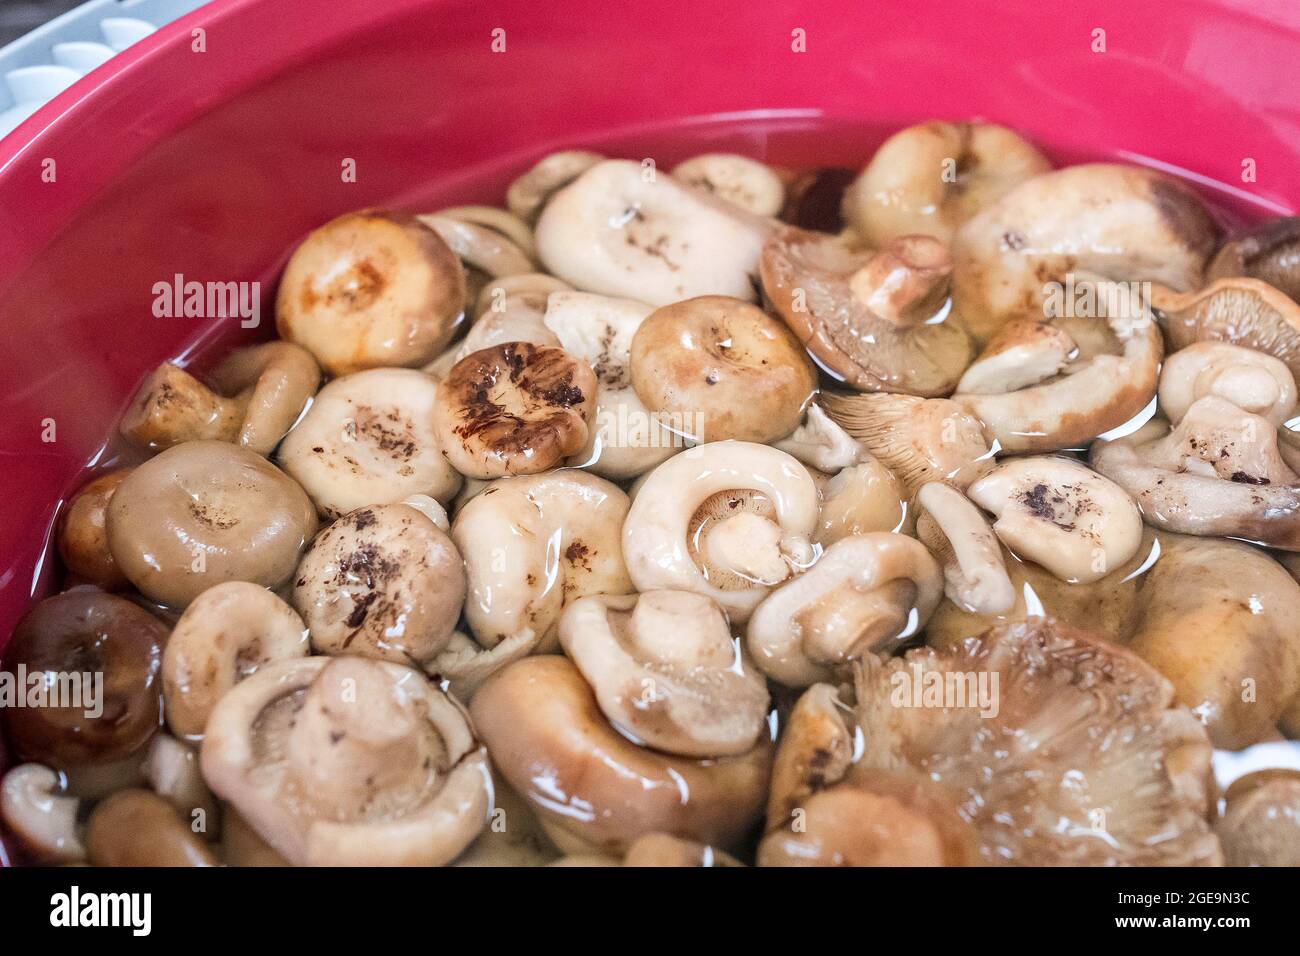 Lactarius resimus has been soaked in water. Mushroom cleaning. Stock Photo